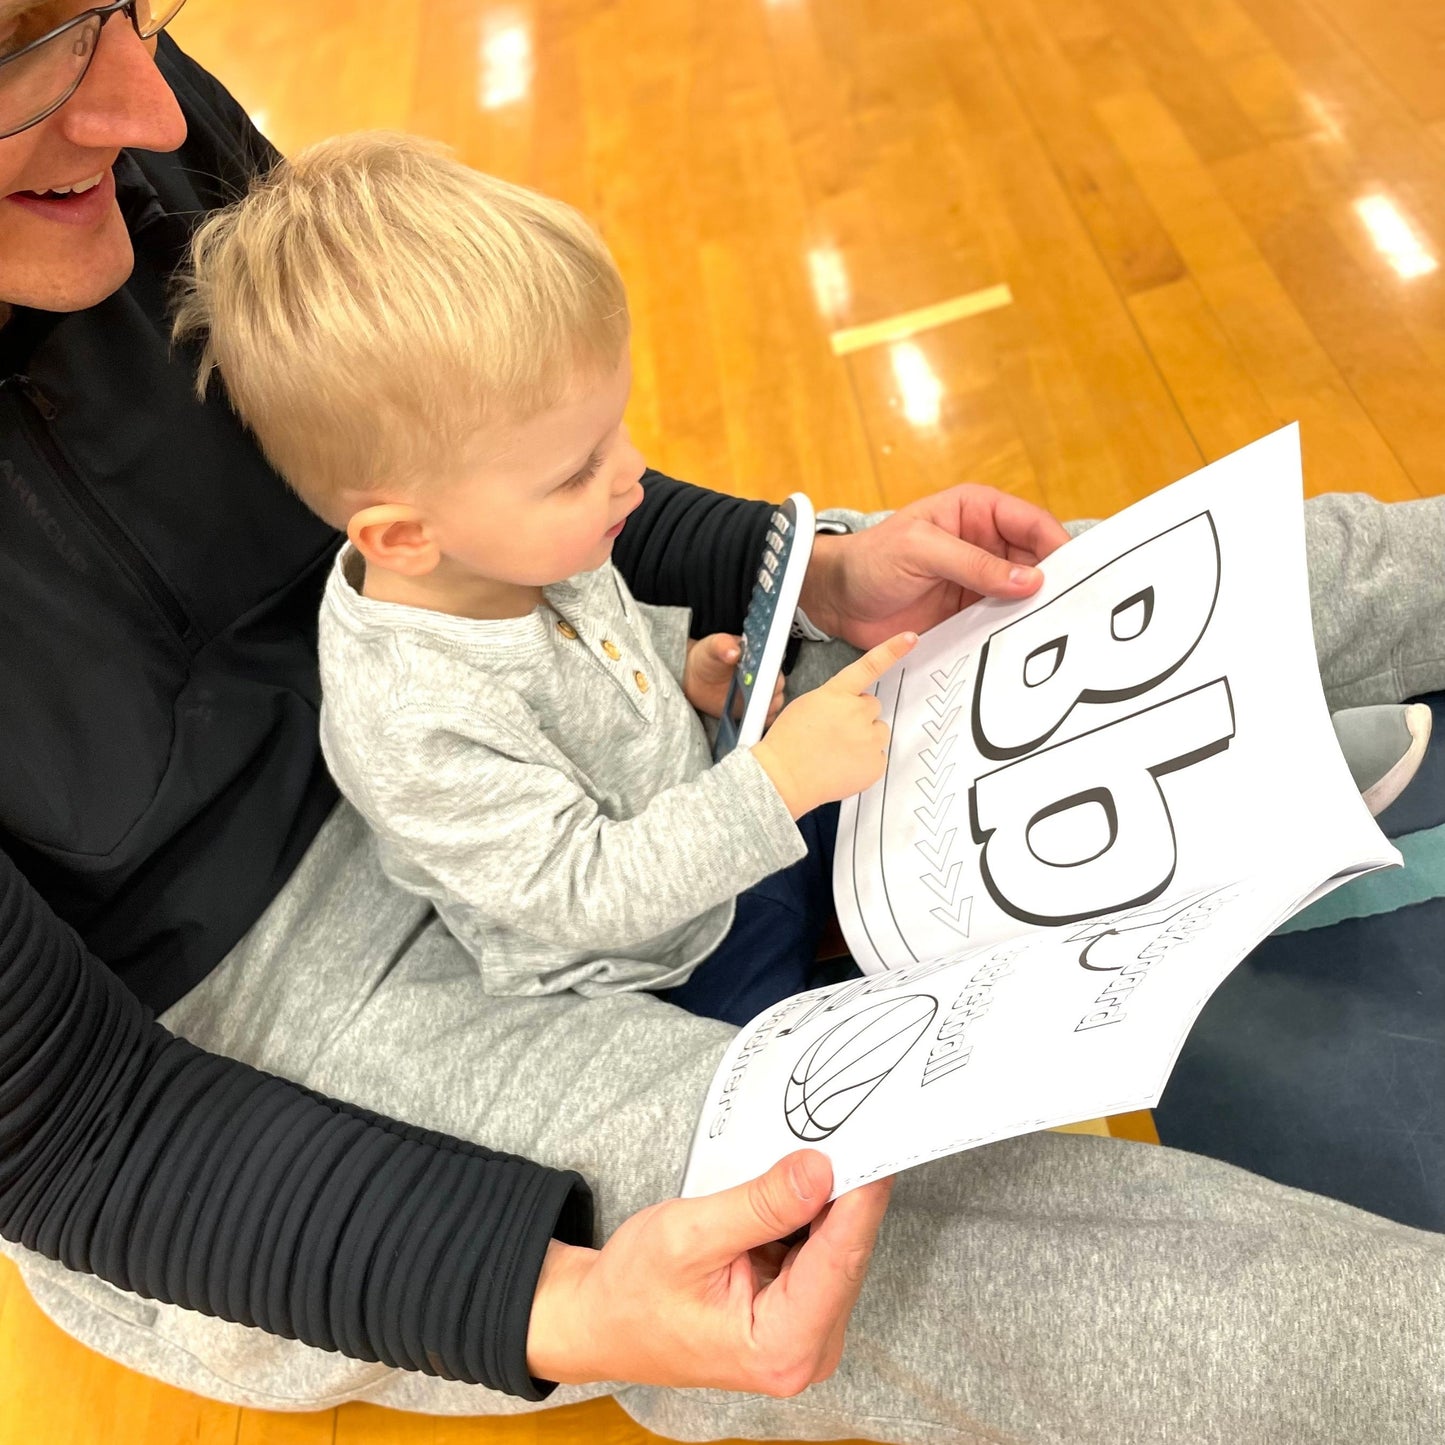 ABC's of Basketball: A Coloring and Activity Book for the Basketball-Loving Kid